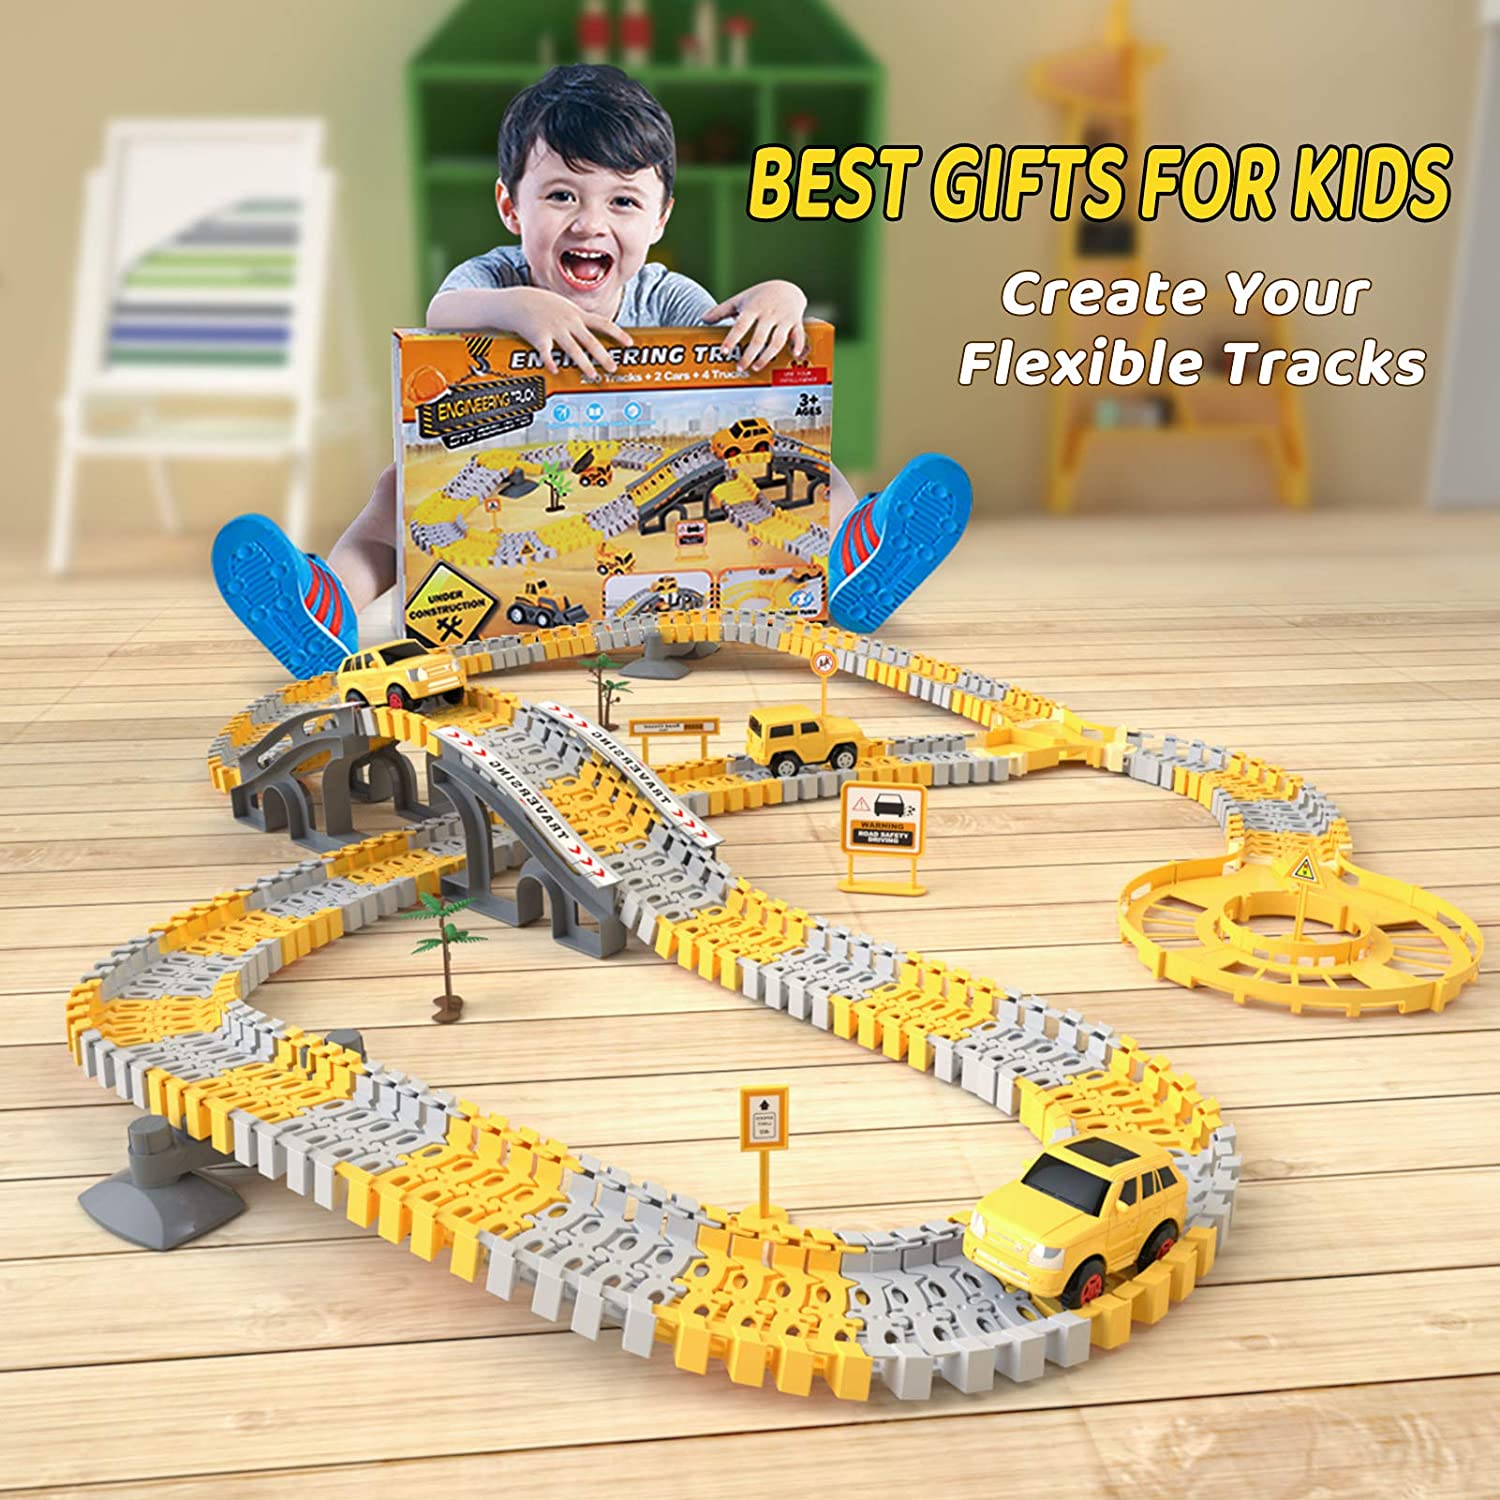 Construction Car and Flexible Track Playset